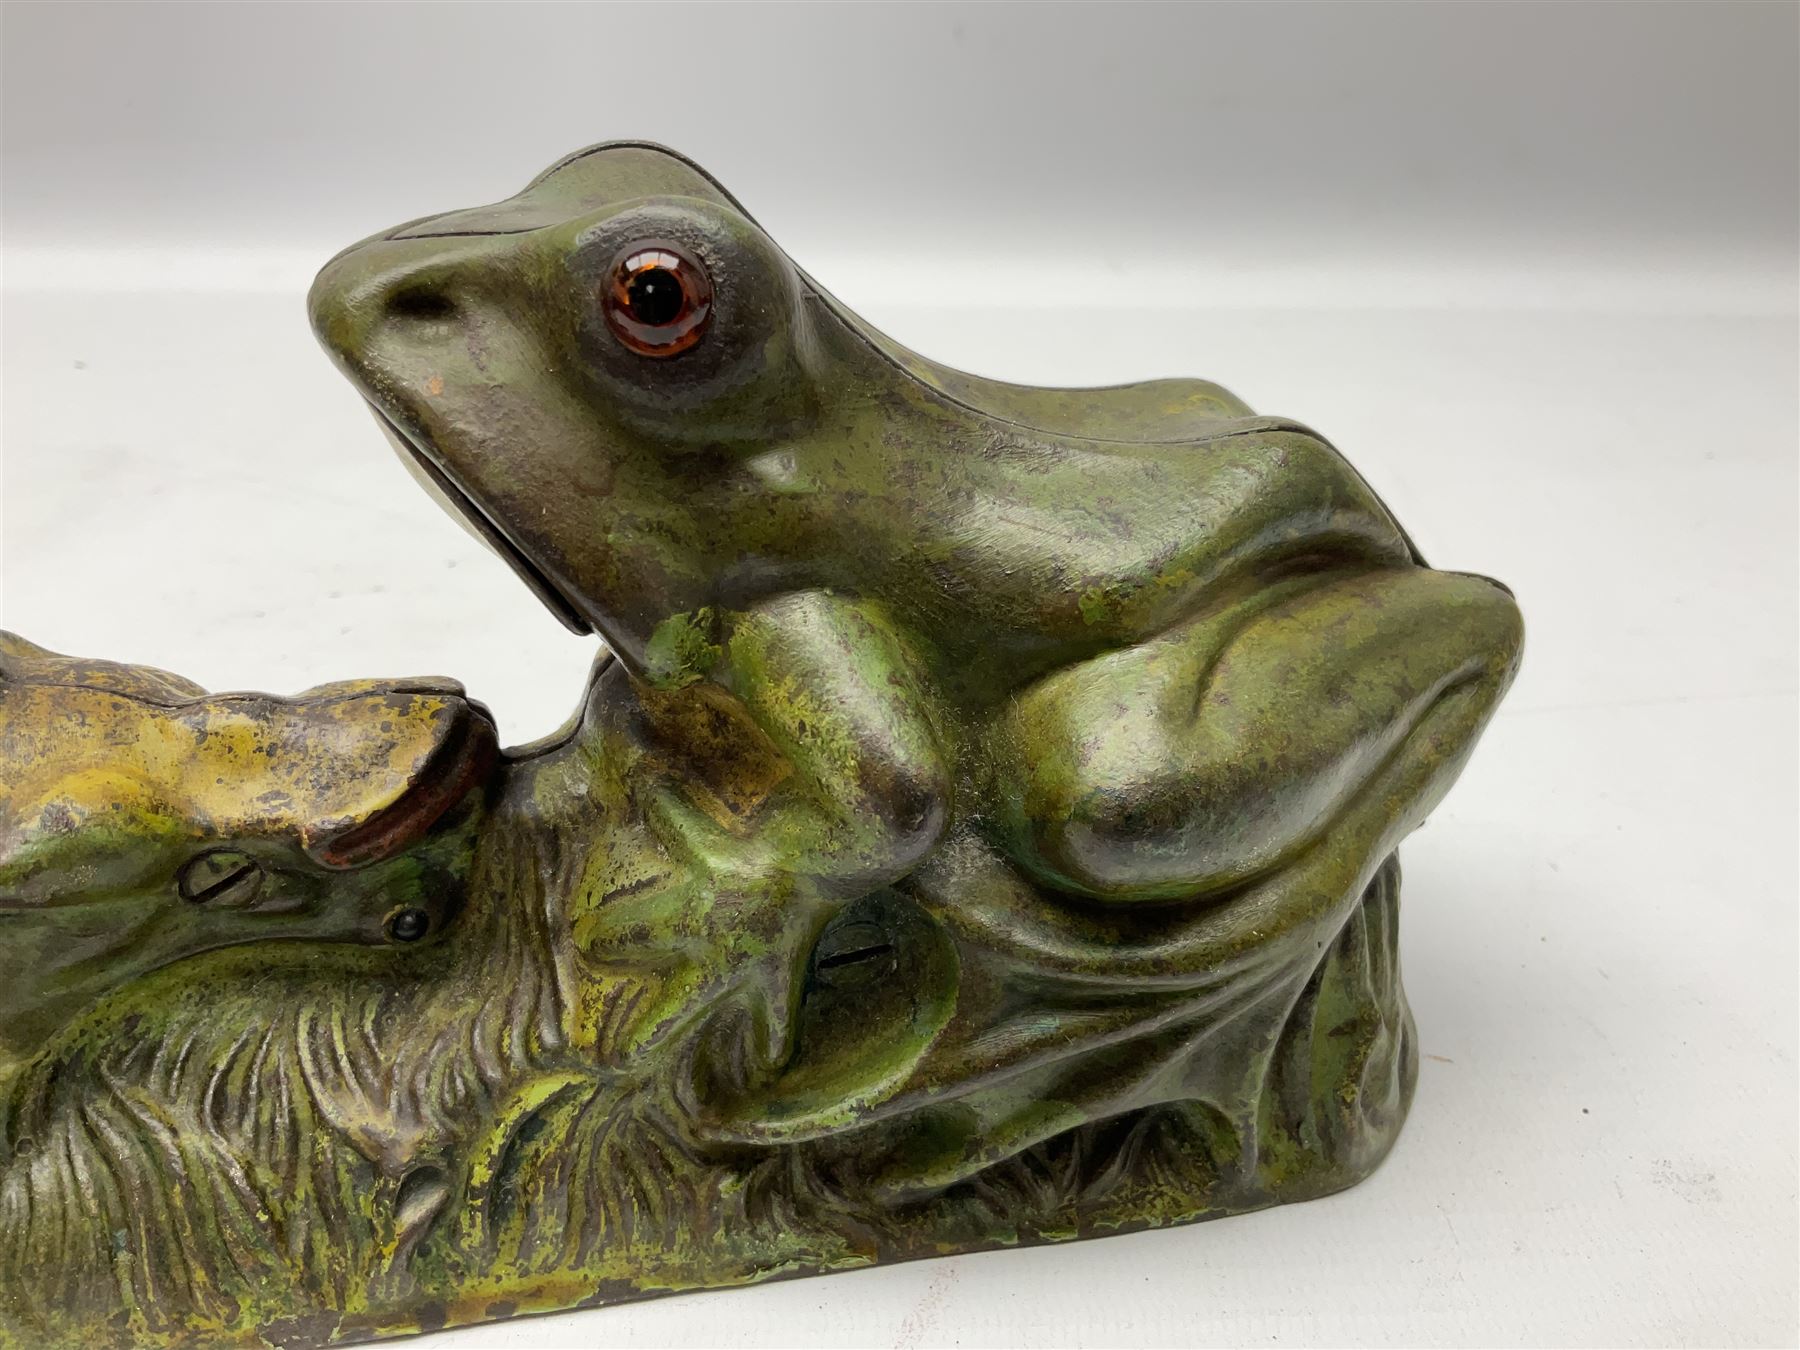 Late 19th century cast-iron mechanical money bank ' Two Frogs' by J & E Stevens & Co; patented 8th A - Image 4 of 9